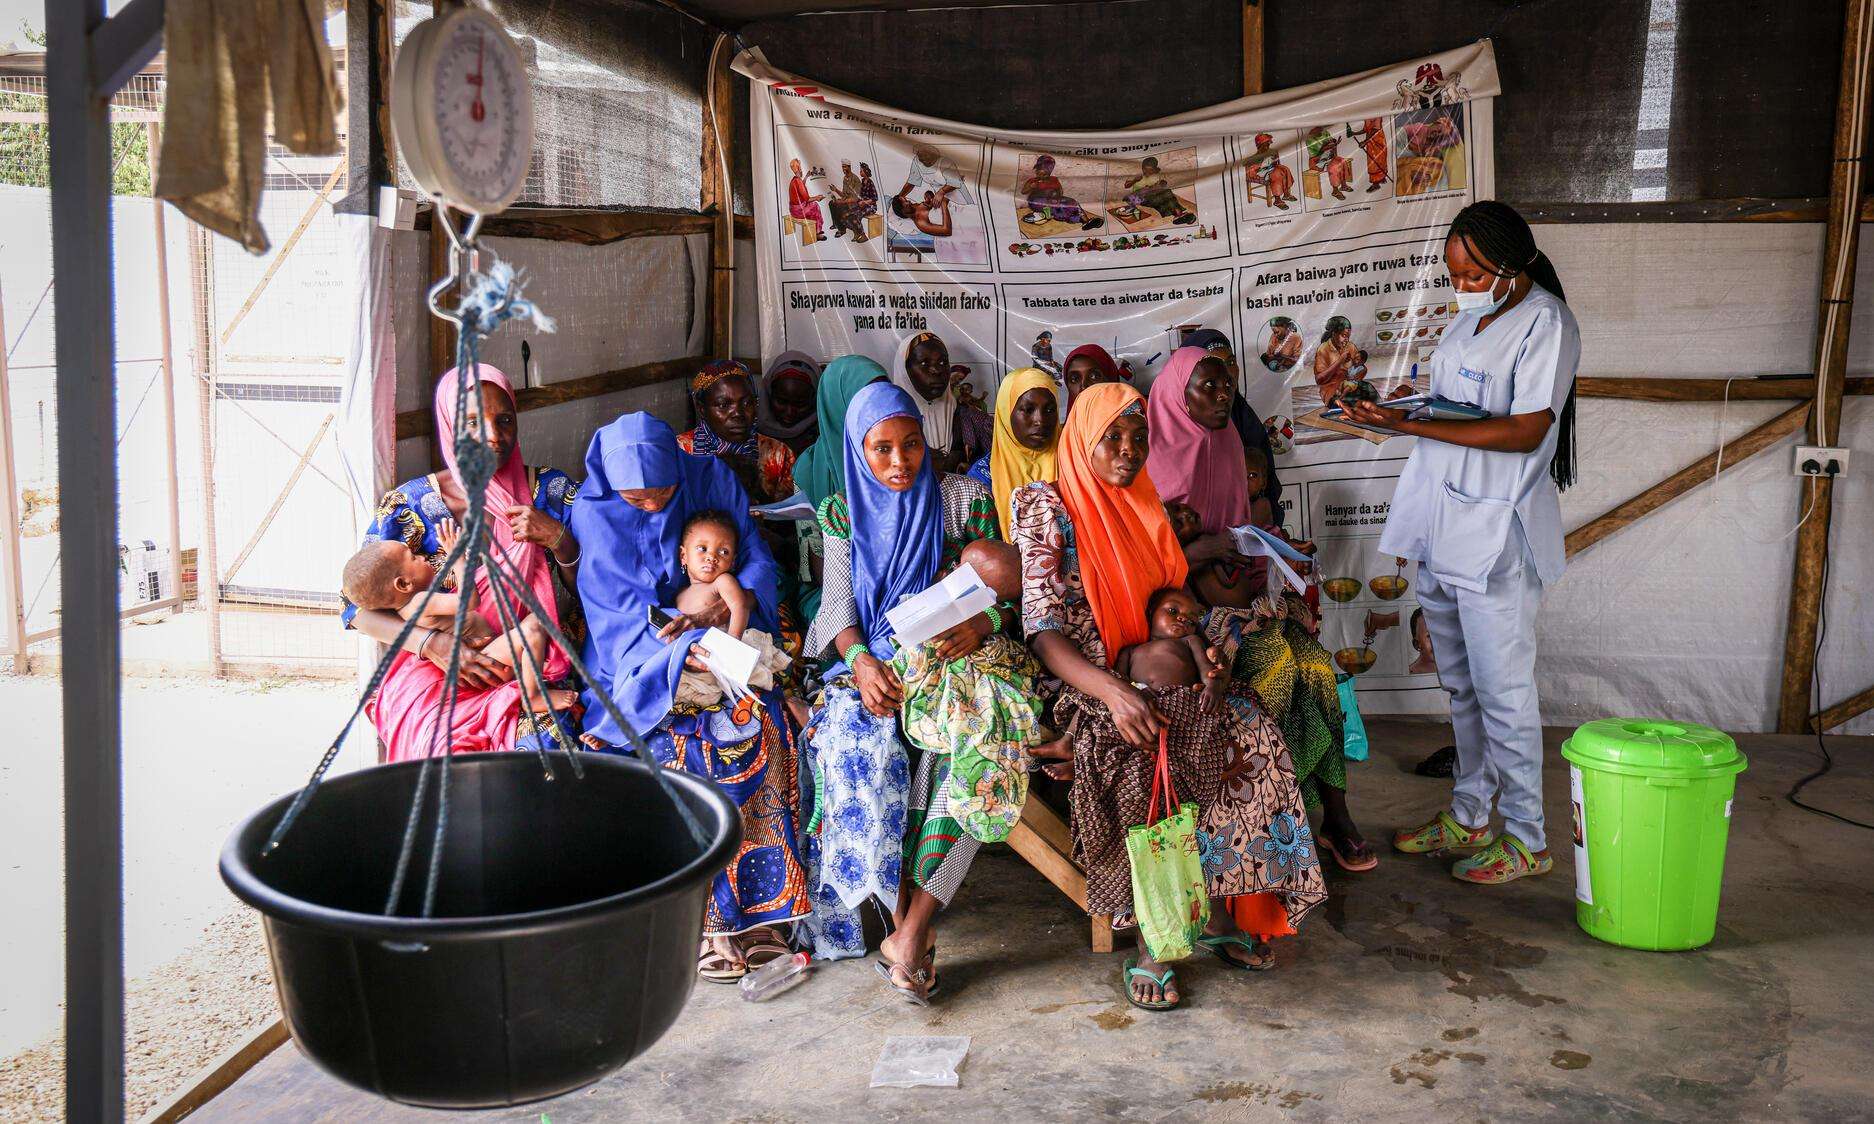 An MSF nurse meets with a group of women and children in a tent in Nigeria.